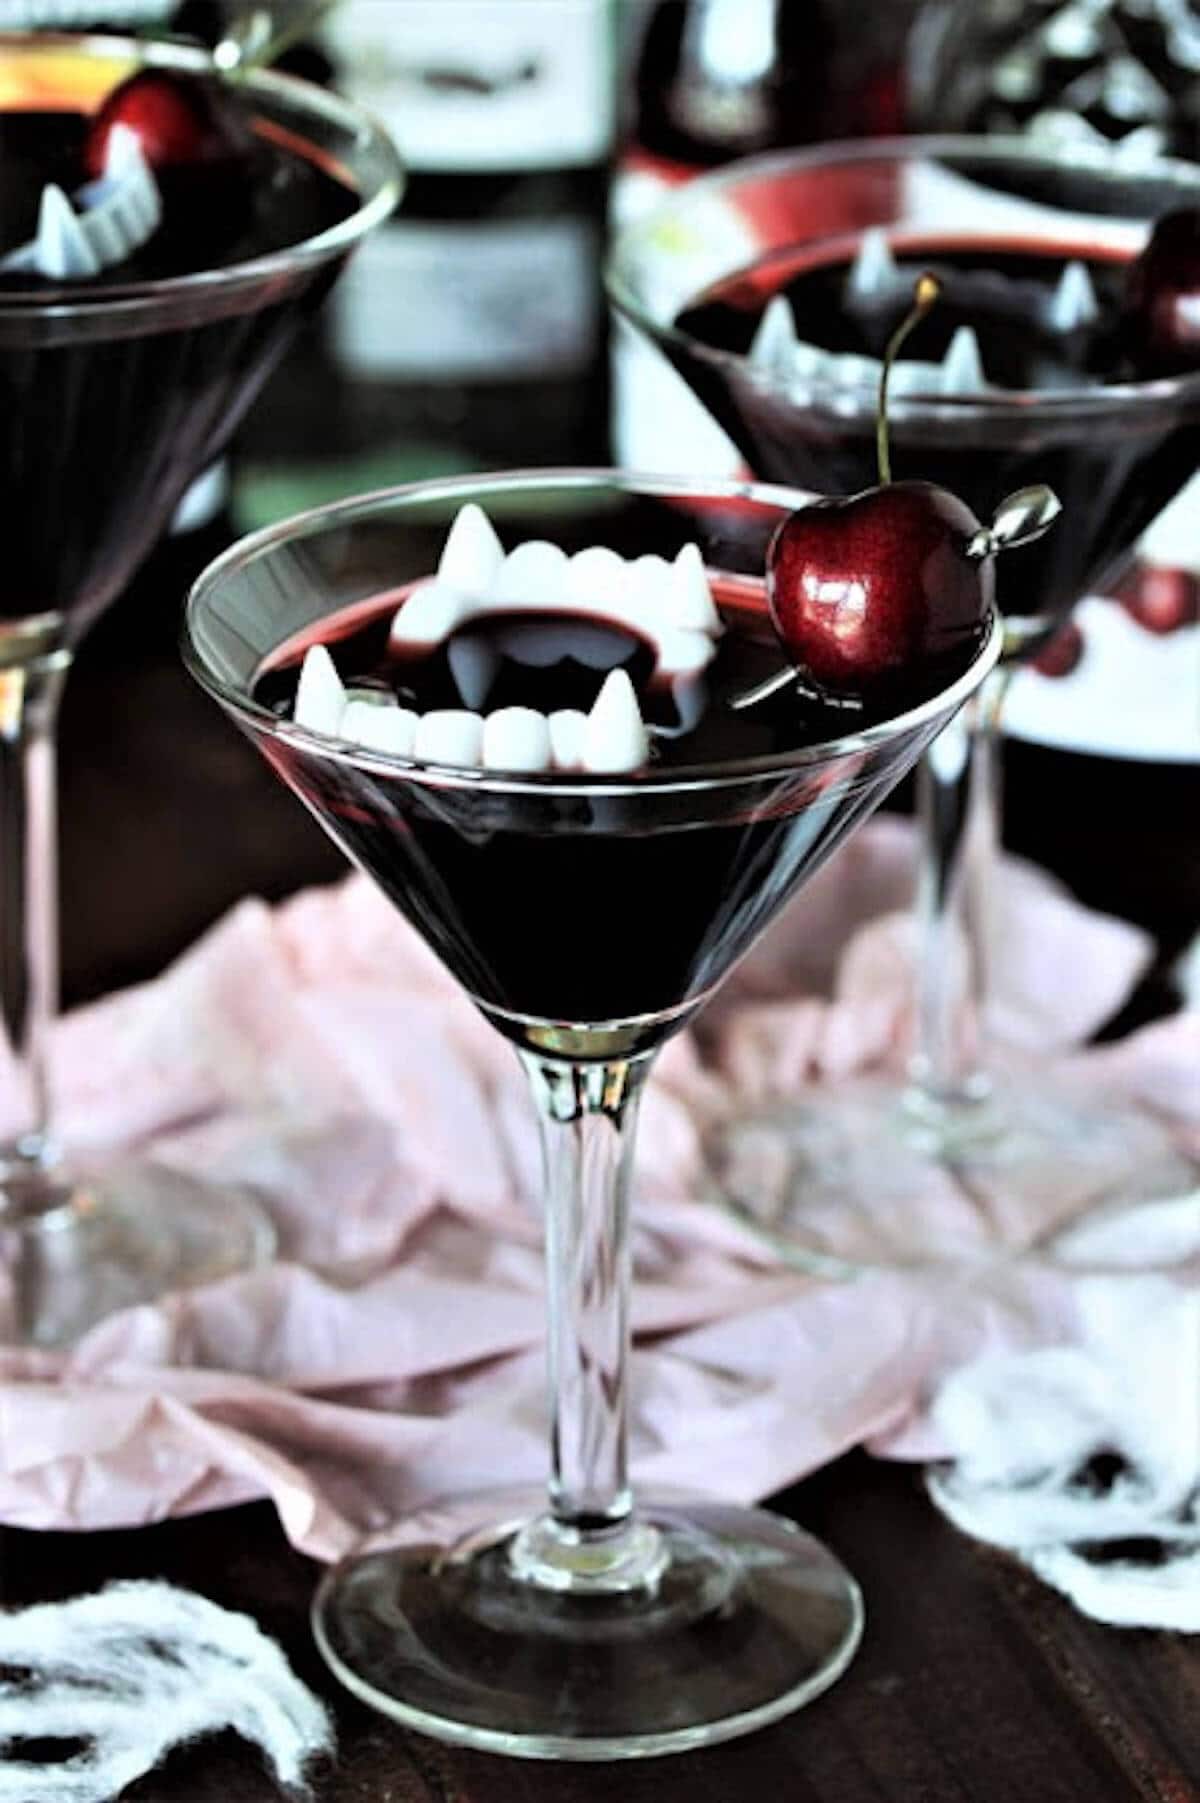 Martini topped with vampire teeth for garnish.